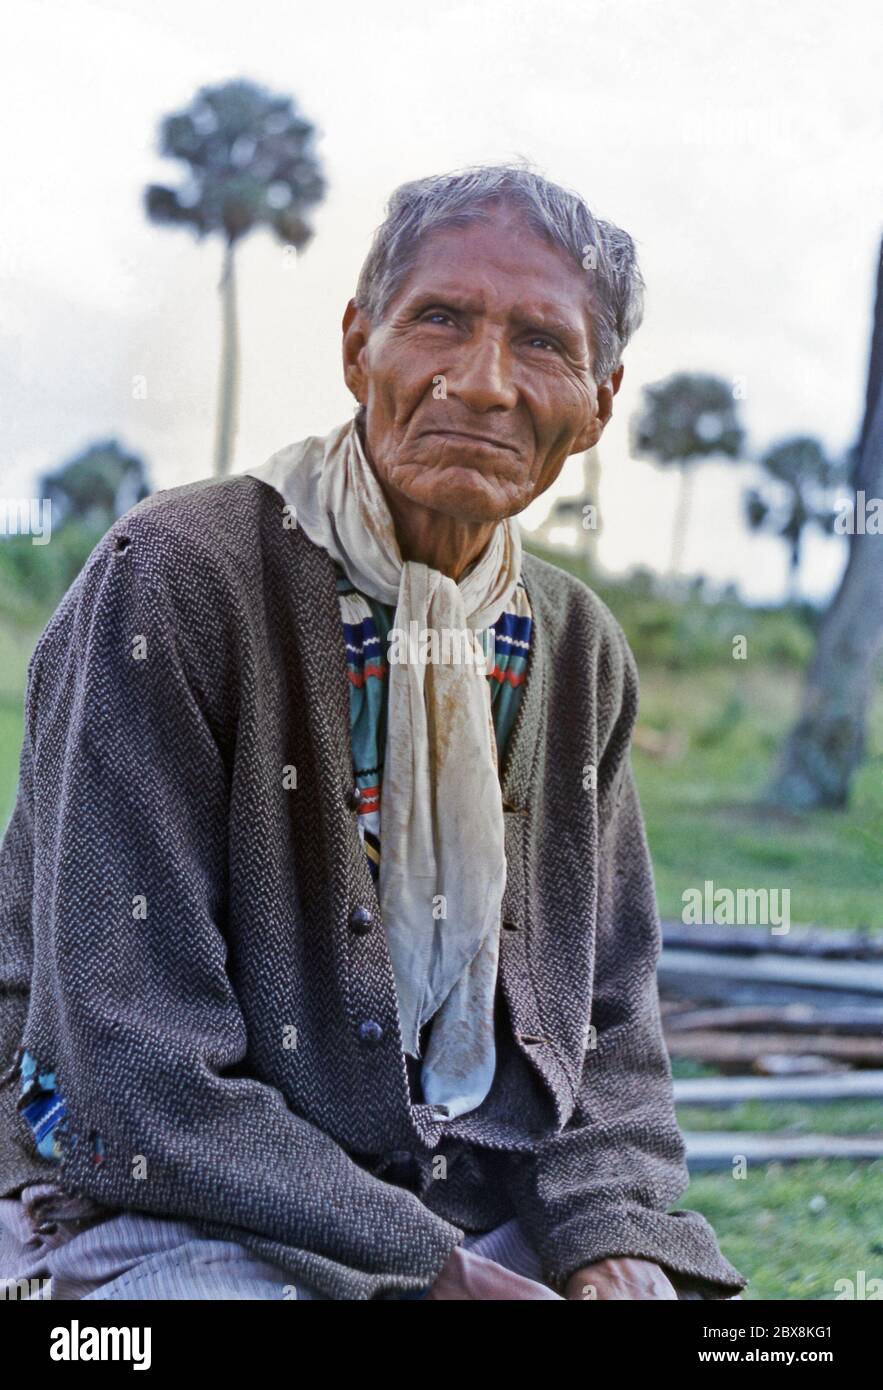 A Seminole Indian, a Native American, at Okalee Indian Village, Florida USA c. 1955 – here an old man poses for the camera. Seminoles were only tribe never to surrender to the US government and call themselves the 'Unconquered People'. Seminoles traditionally are renowned for their basketry skills, weaving and colourful patchwork dresses and beadwork. Stock Photo